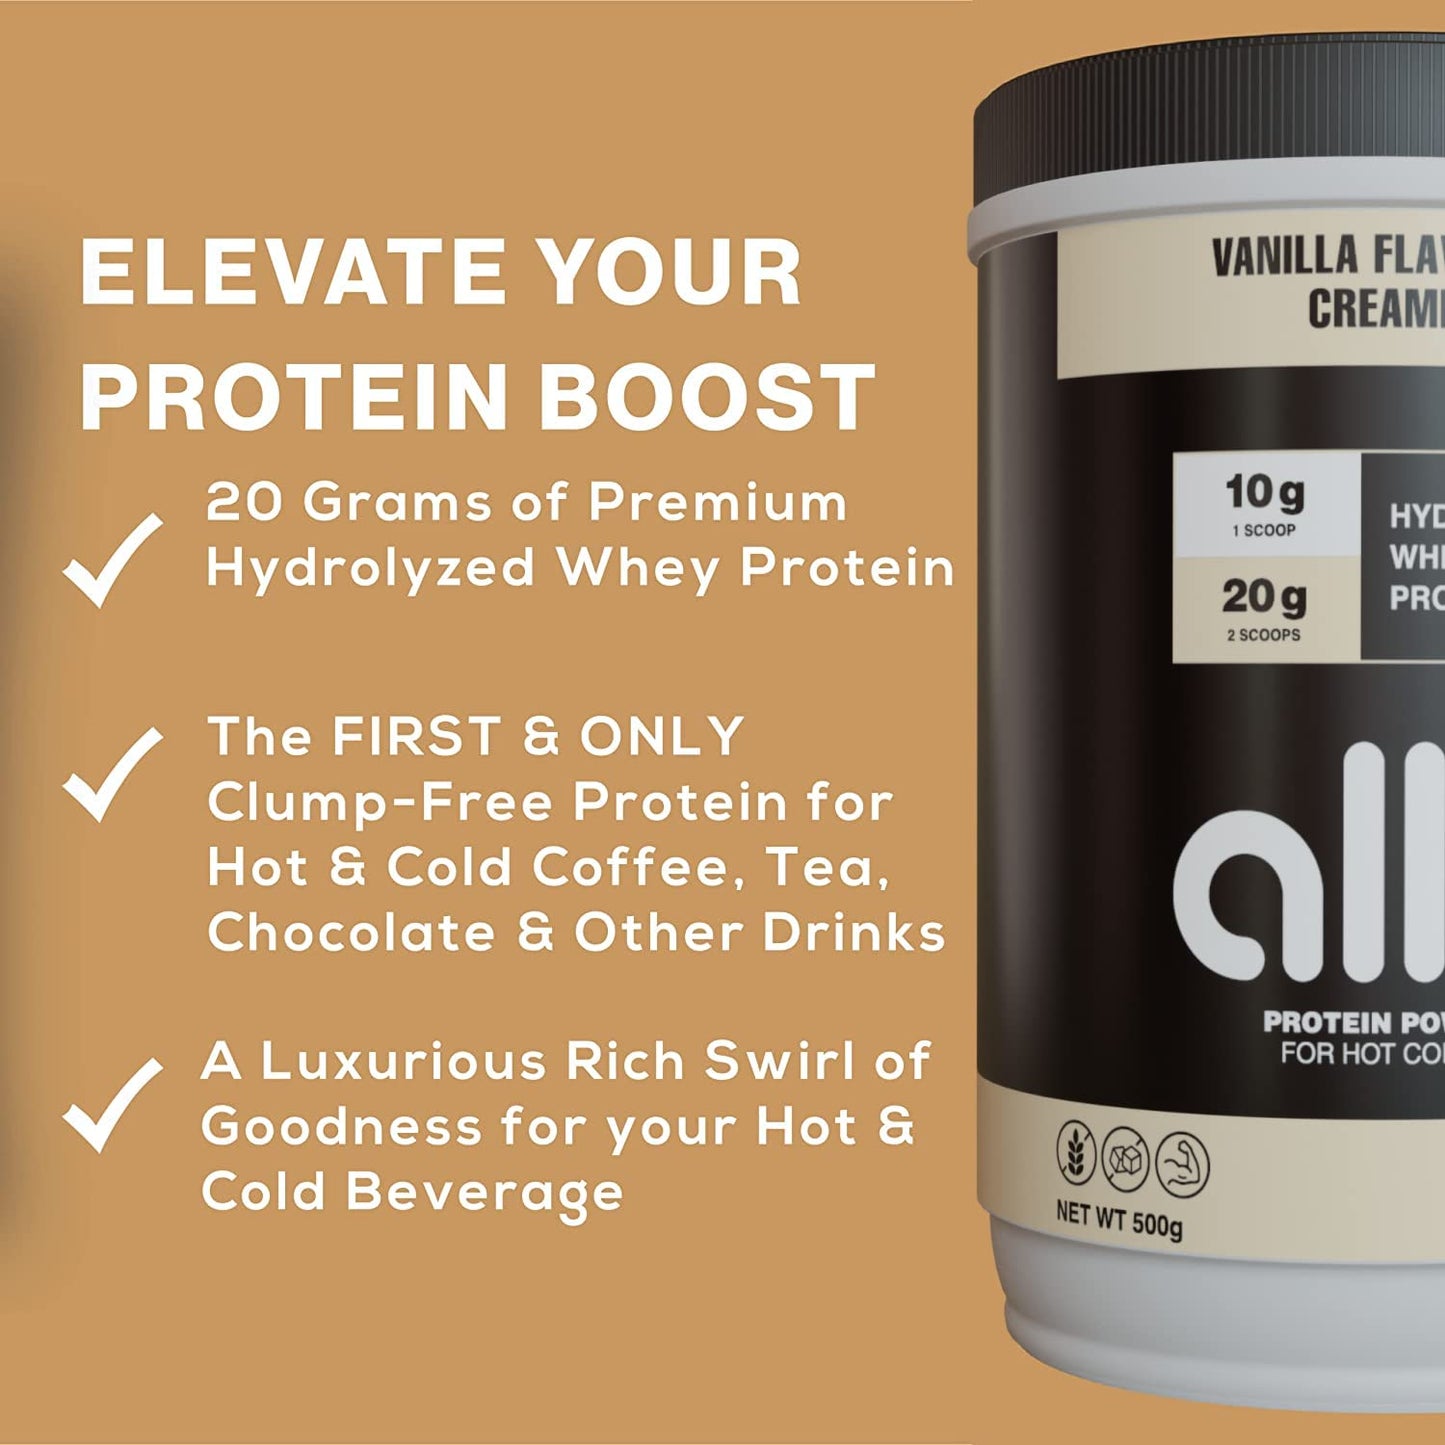 Allo Vanilla High Protein Powder Coffee Creamer for Hot & Cold Coffee, Tea, Chocolate, Drinks | Low Carb, Gluten-Free, Clump-Free, Sugar-Free | 20 Grams of Hydrolyzed Whey Protein Powder | 500g (2 Pack)